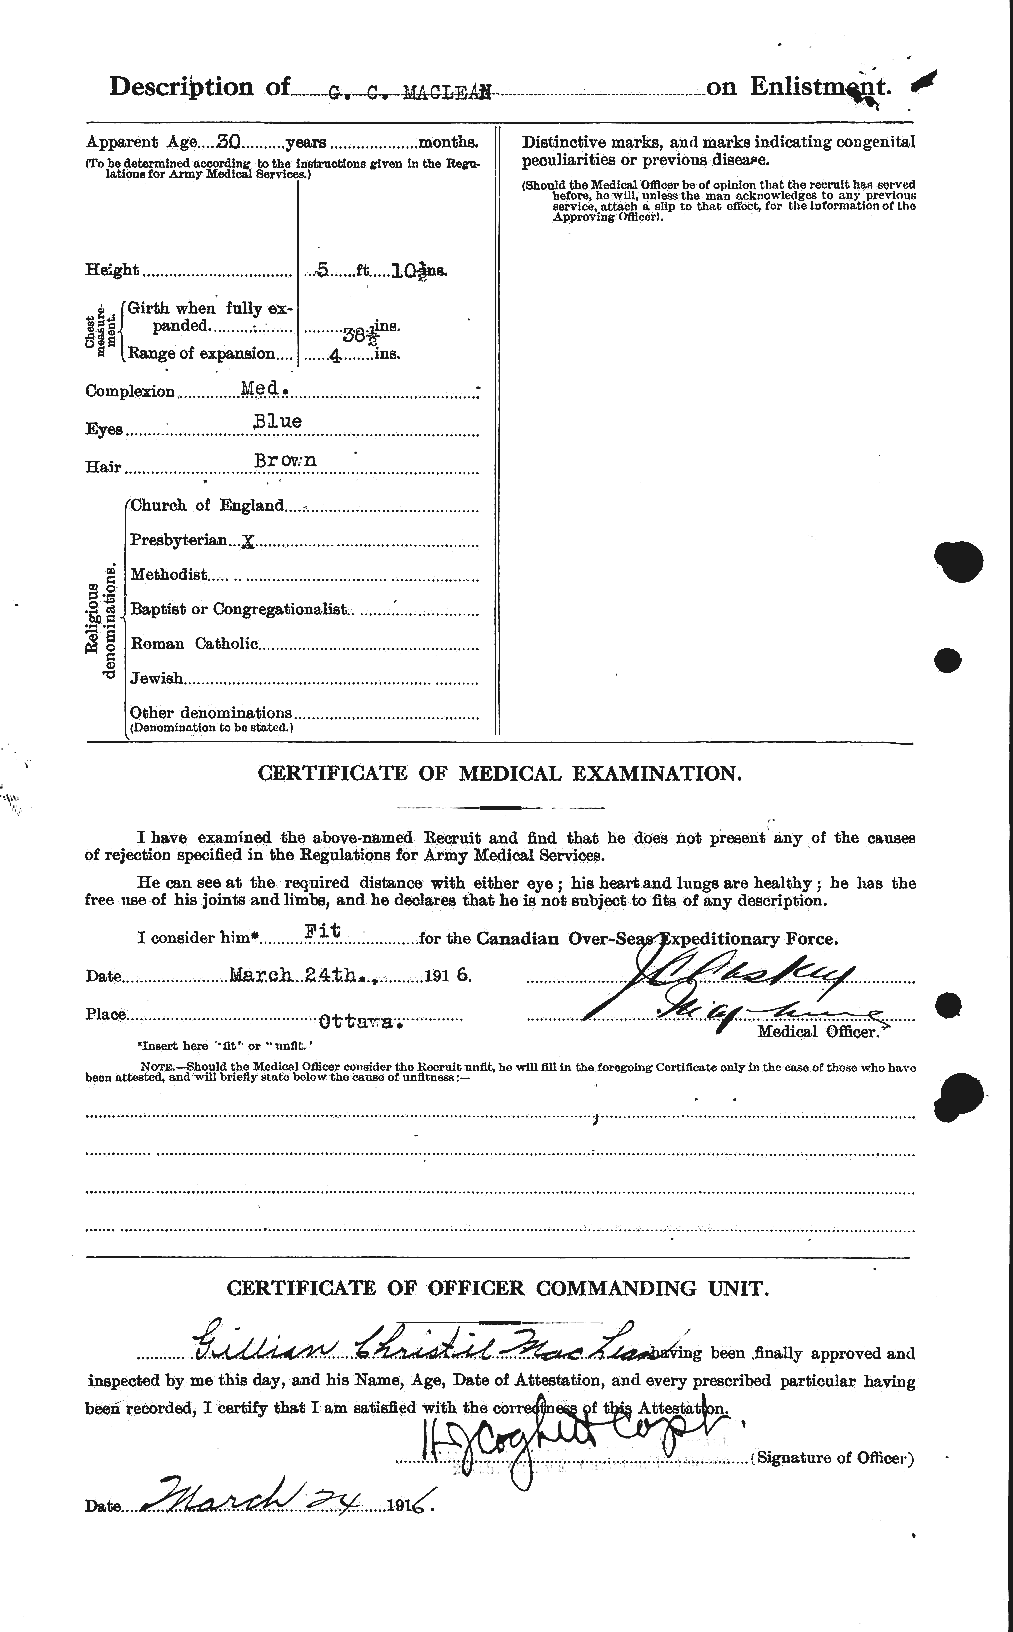 Personnel Records of the First World War - CEF 540299b